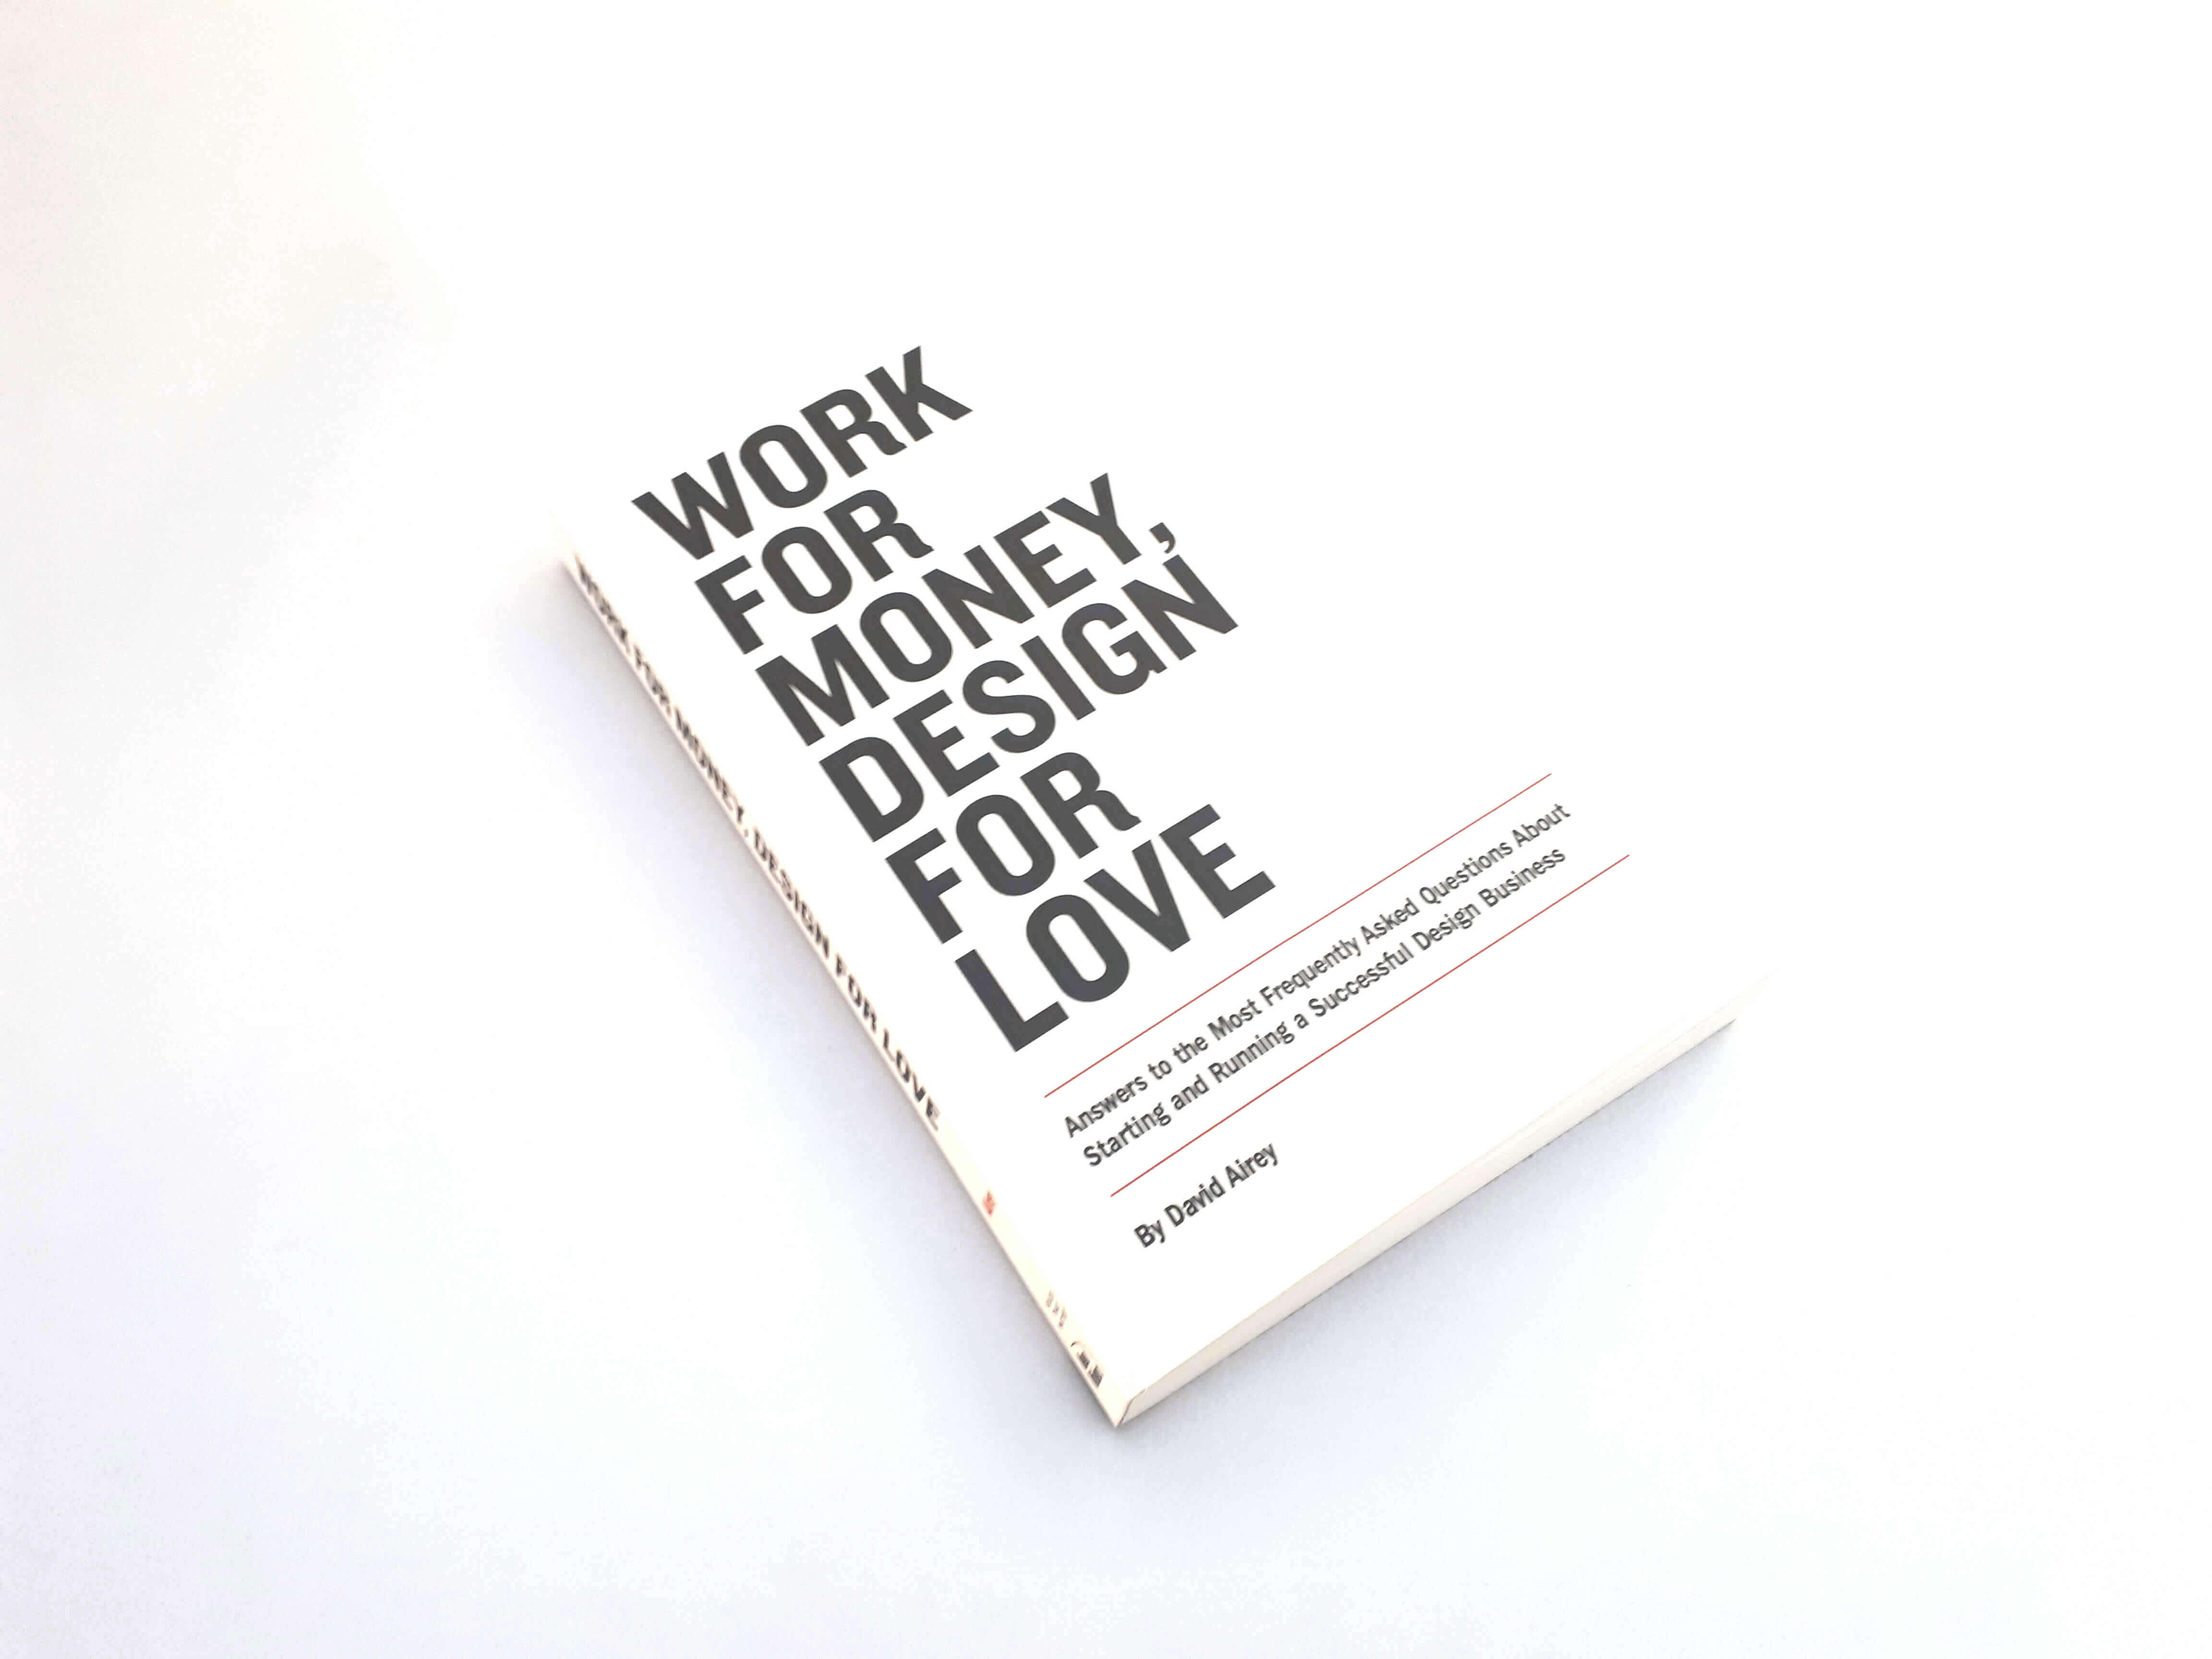 Work for money, design for love by David Airey